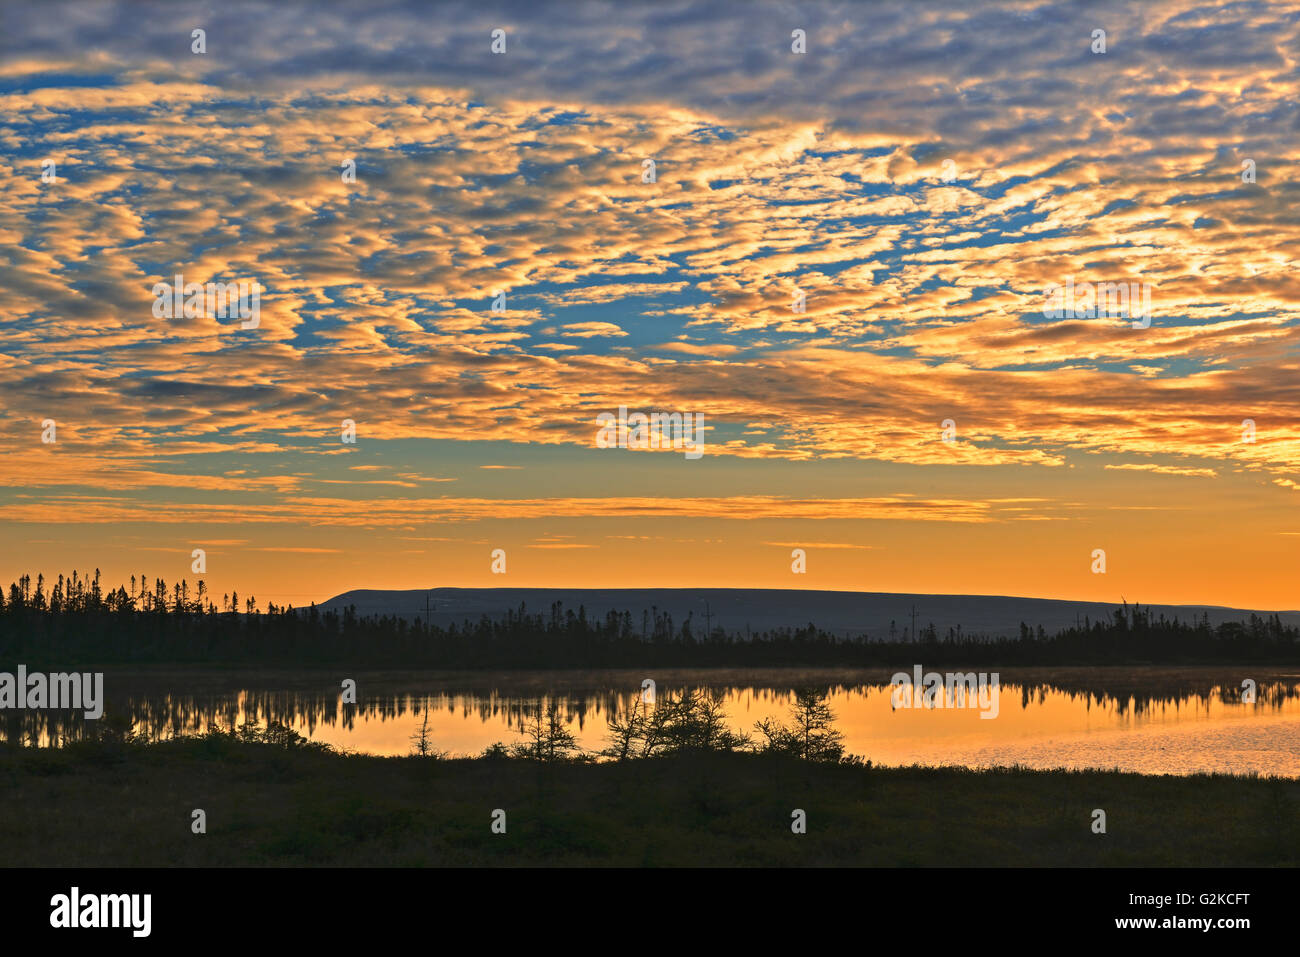 Clouds at sunset over pond Hawke's Bay Newfoundland & Labrador Canada Stock Photo